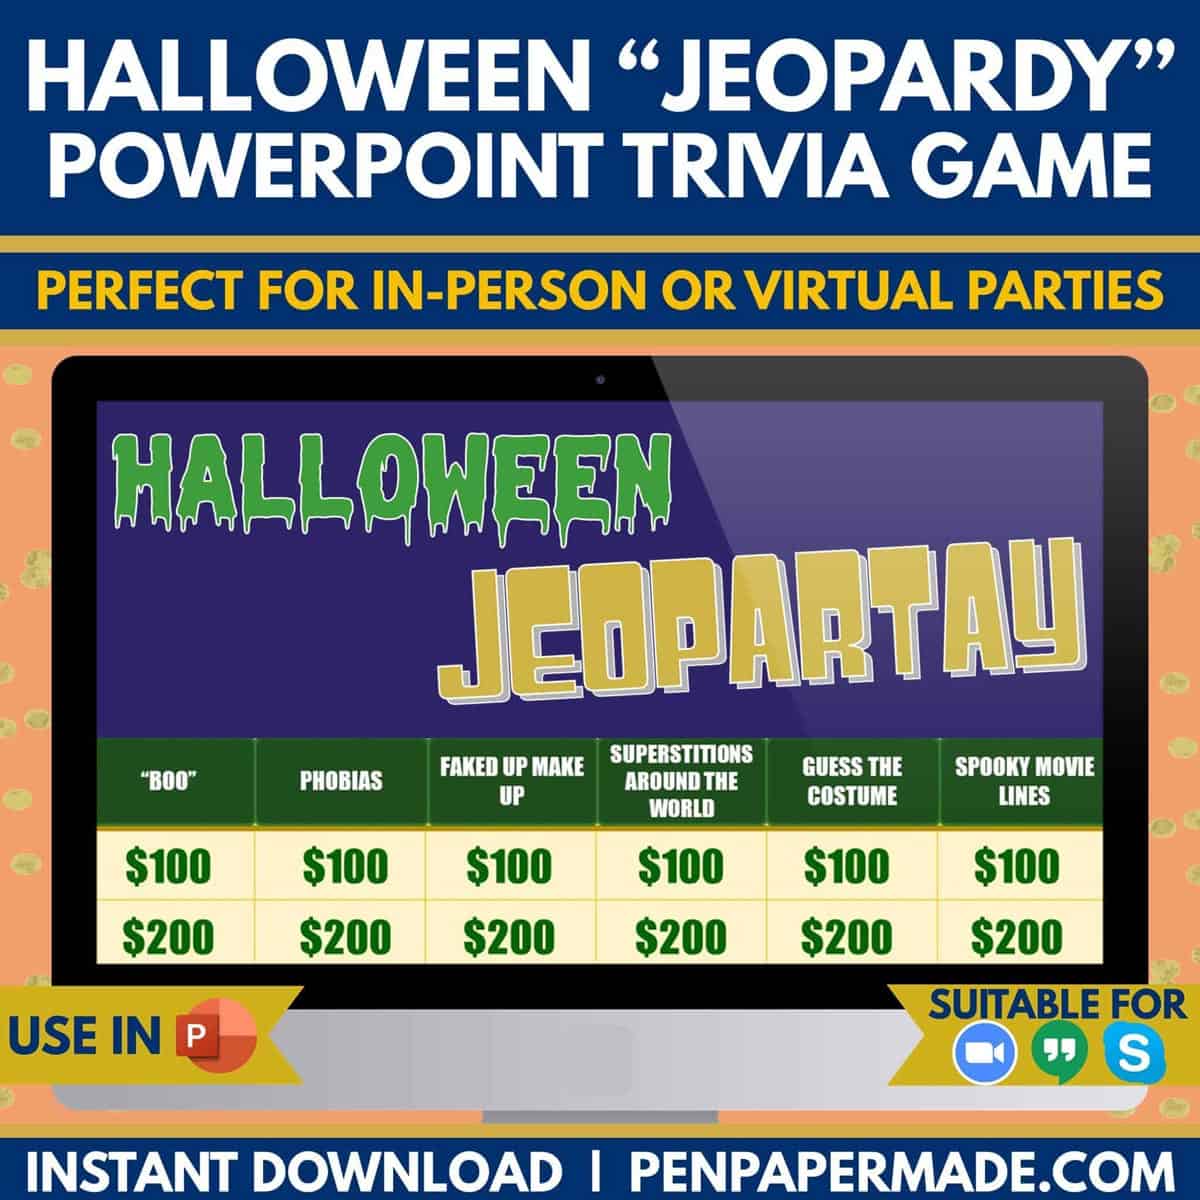 halloween jeopardy powerpoint title and game categories.